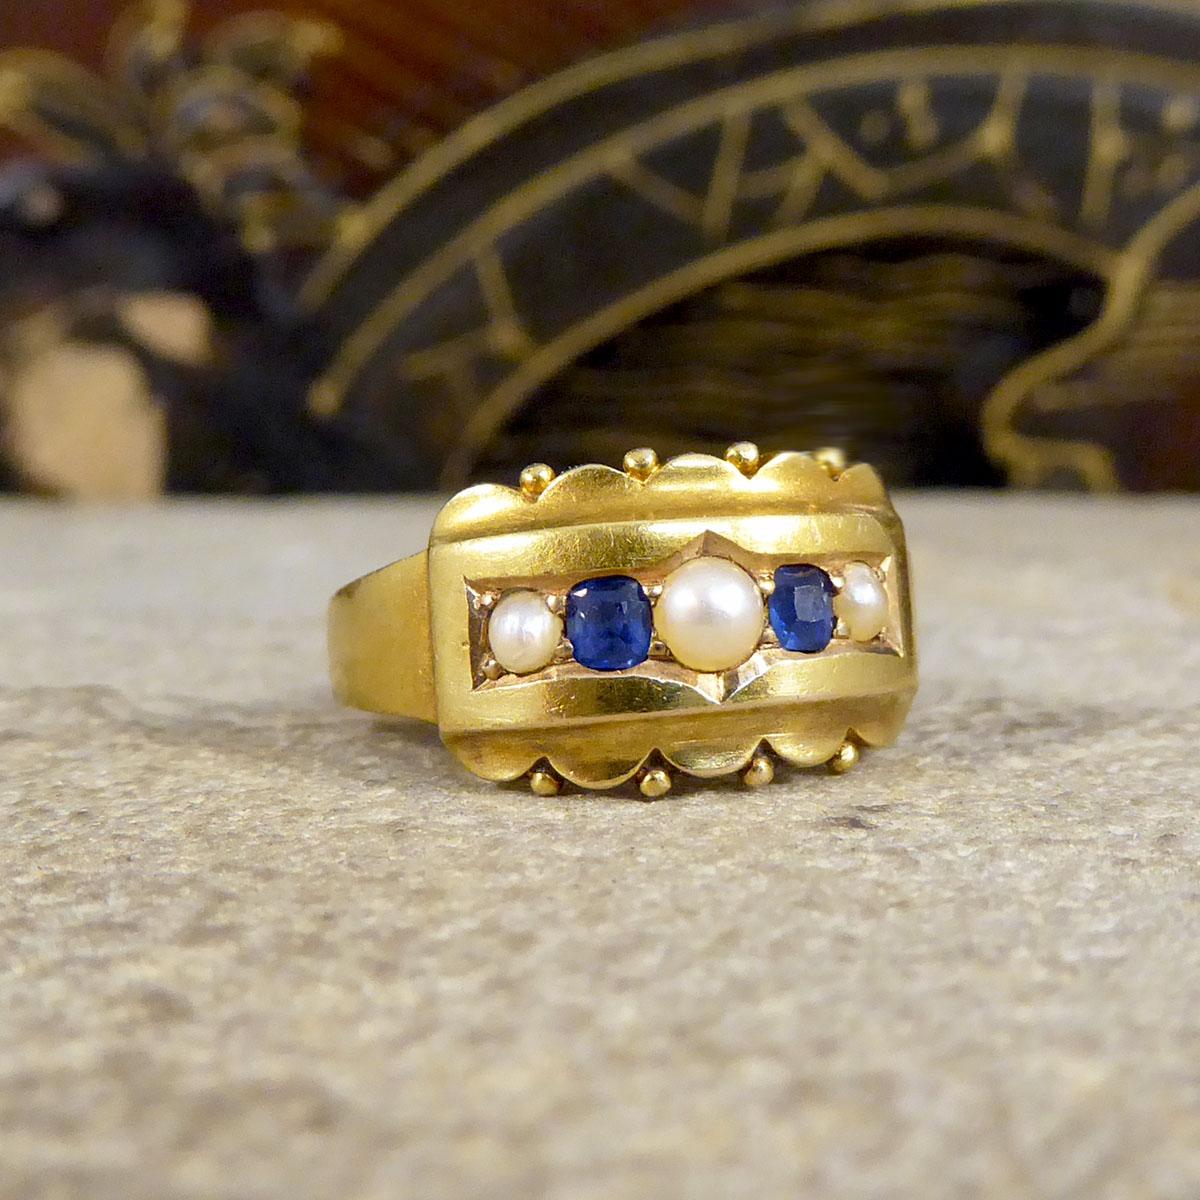 This lovely antique ring was created in the Late Victorian era with a beautifully decorated head to the ring and clear hallmarks on the inside of the band. The hallmarks shows that this ring was hand crafted in 1881 in 15ct Yellow Gold with Chester